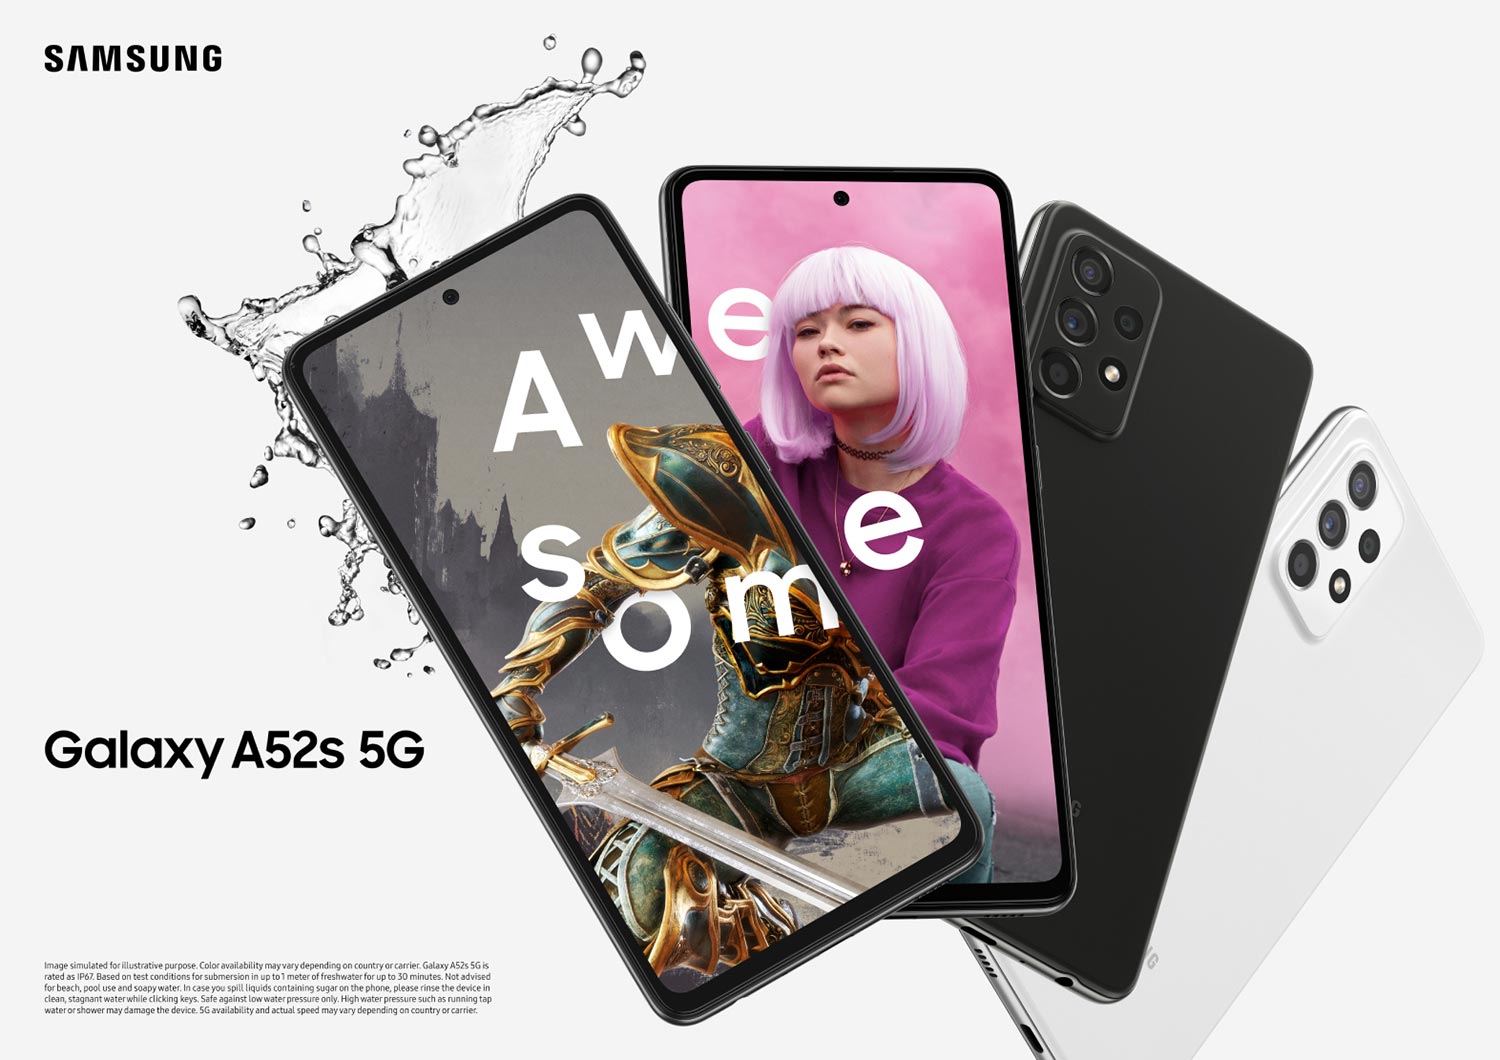 Samsung Galaxy A52s 5G Officially Launched in Malaysia